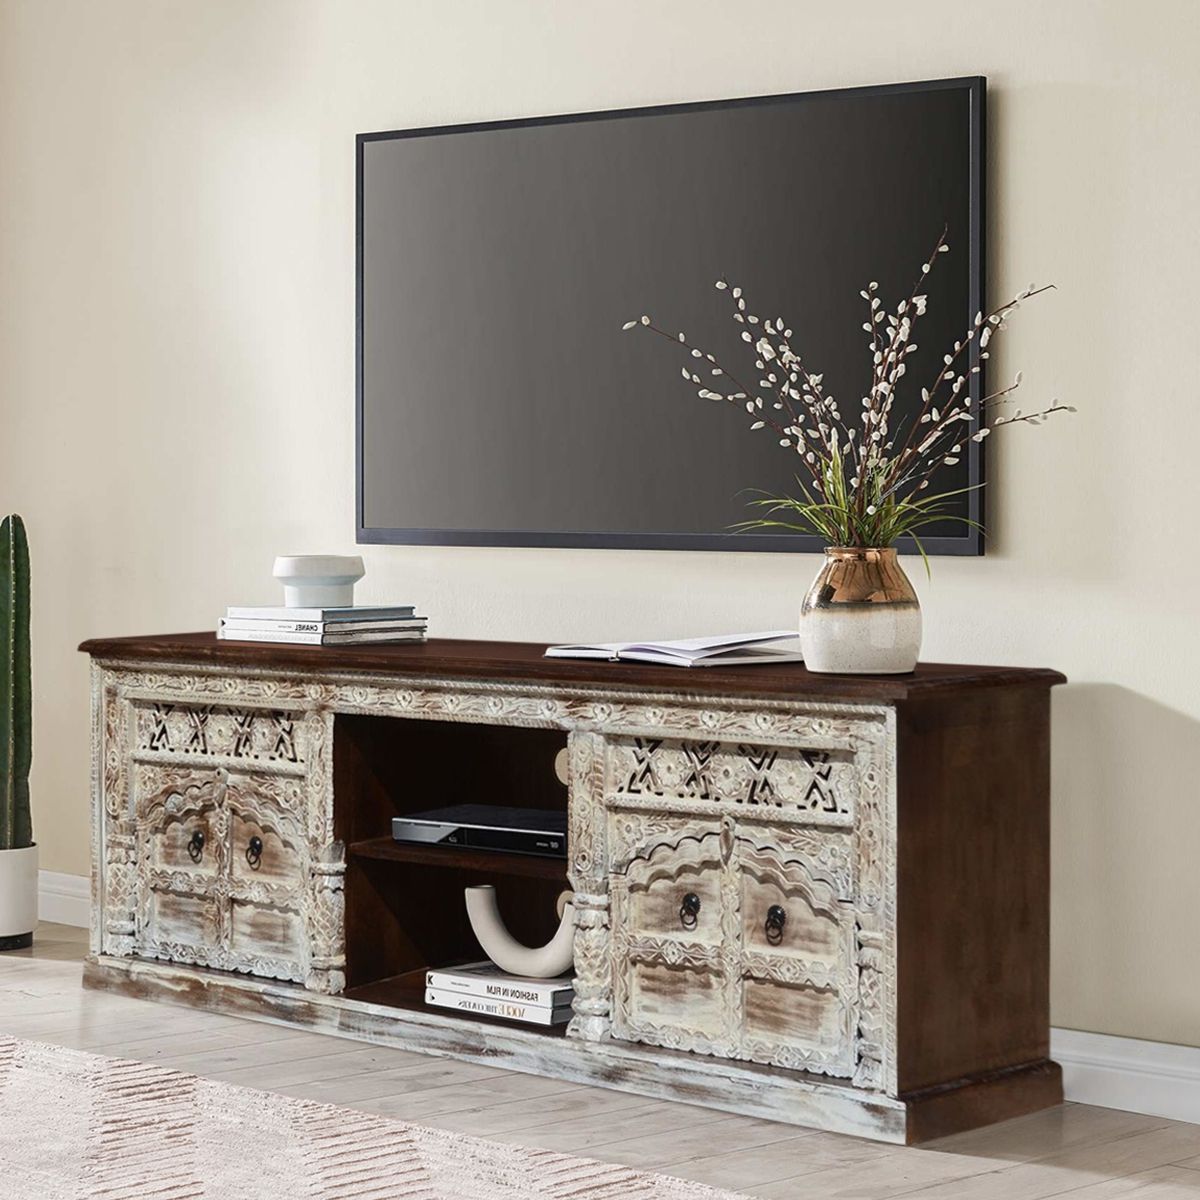 Favorite Wooden Hand Carved Tv Stands Inside Tropical Hand Carved 70 Inch Solid Wood Tv Media Stand (View 6 of 10)